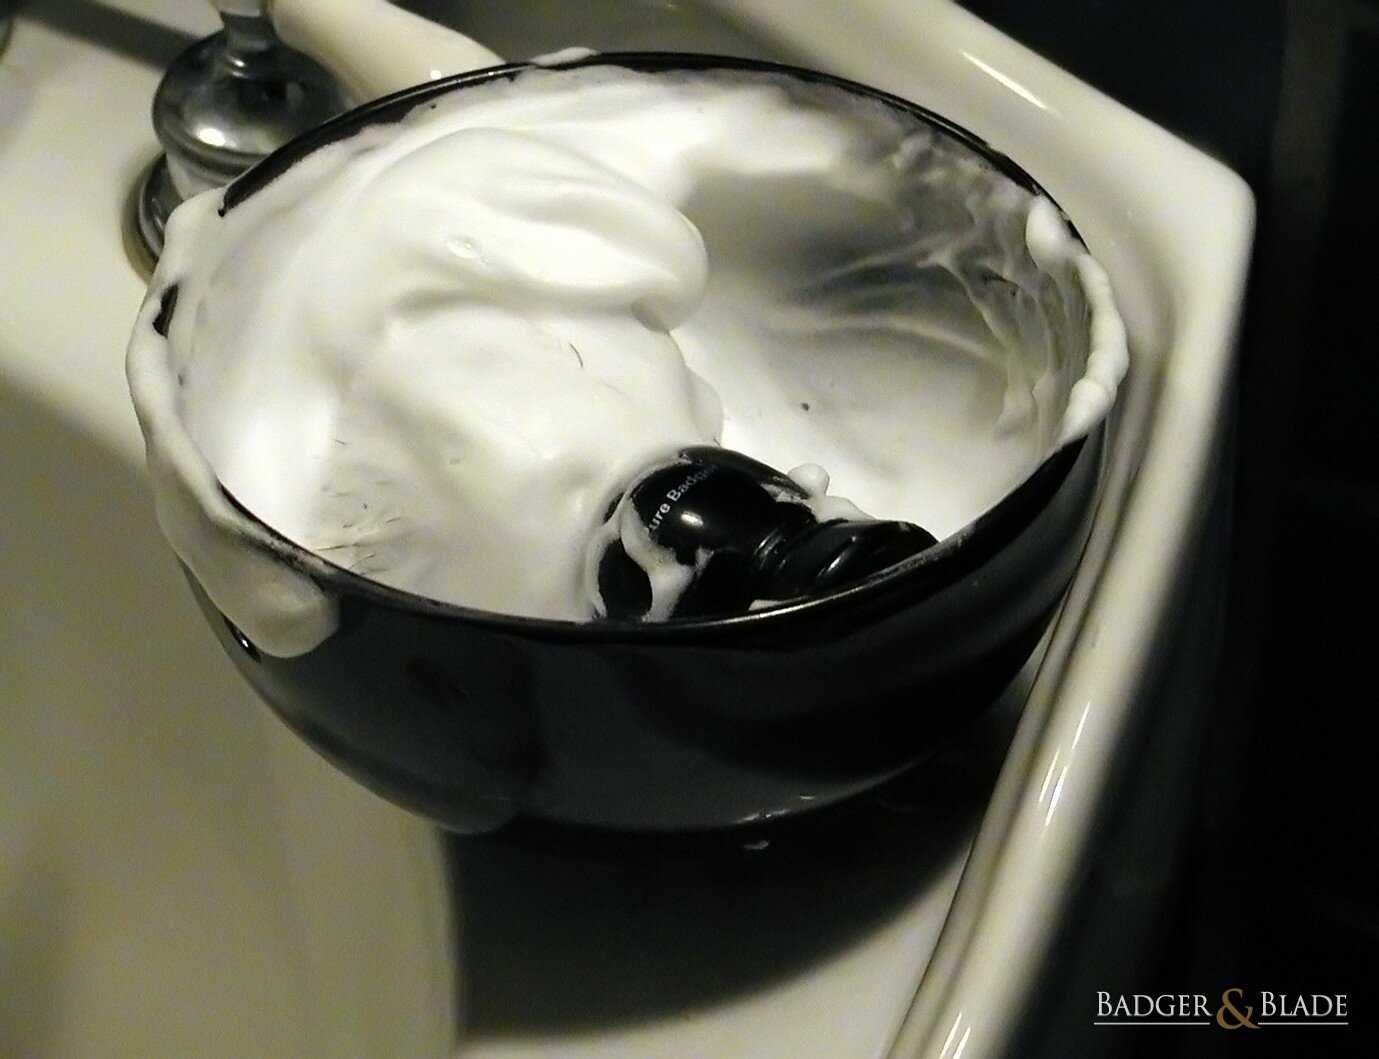 Lather Brush in bowl